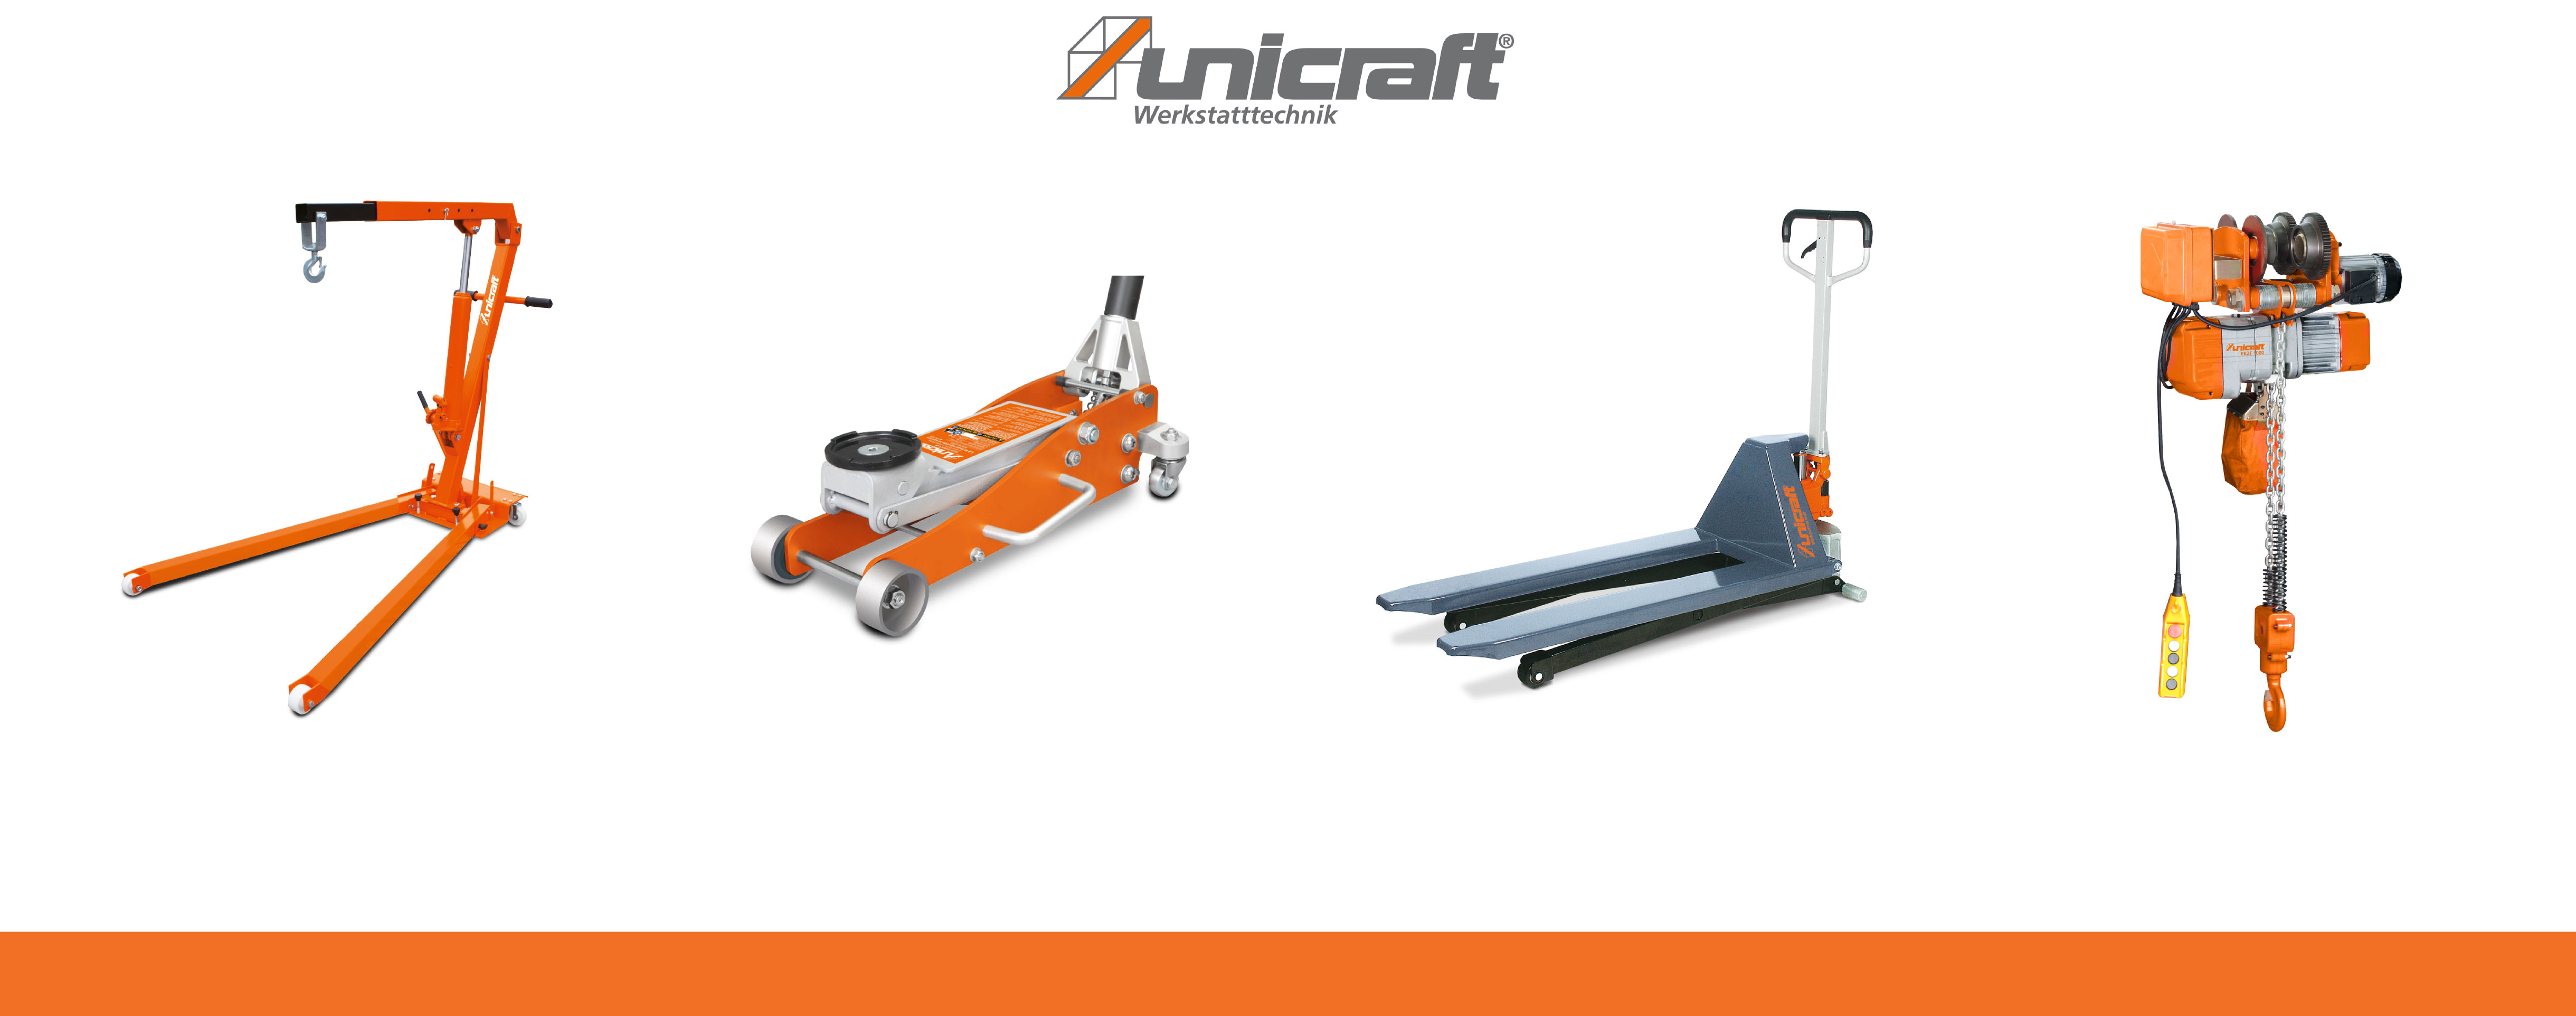 Productos Unicraft Colombia